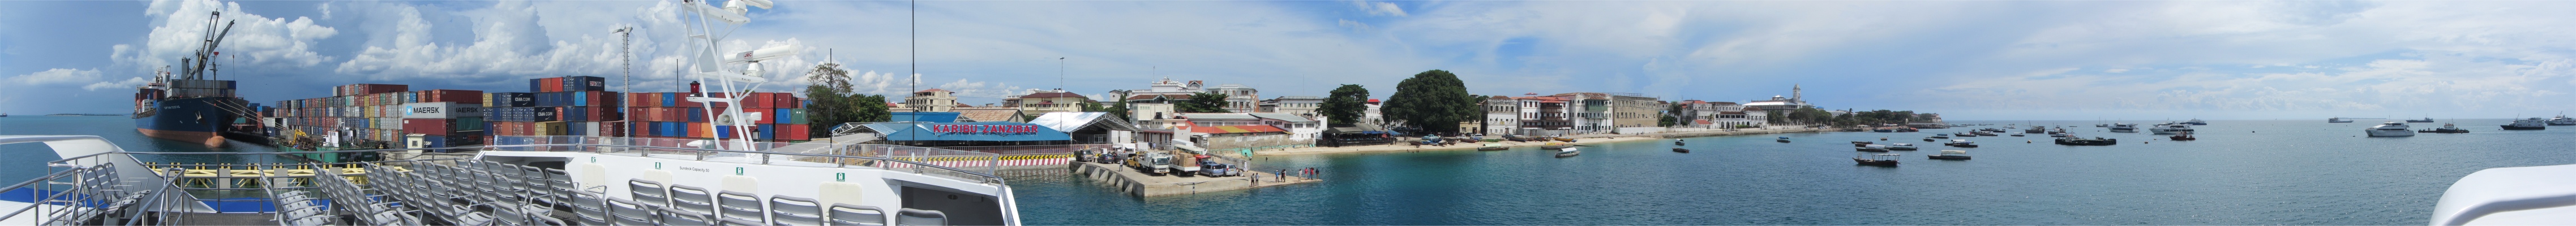 ferry_view_of_stone_town